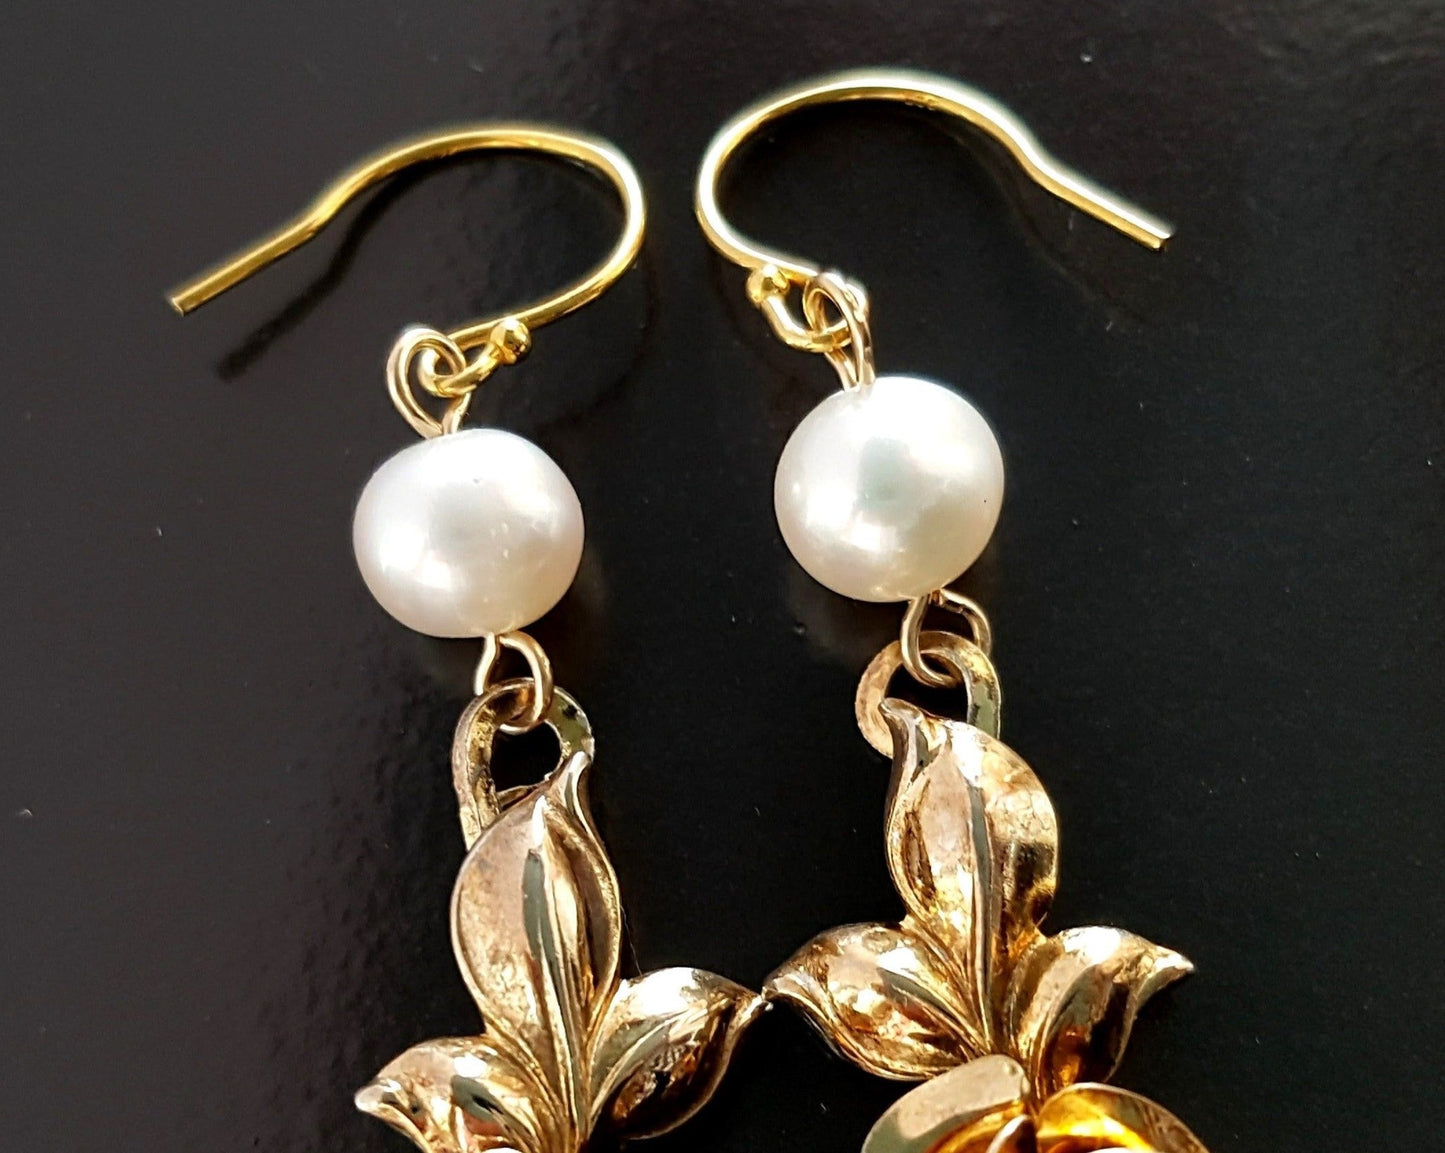 Long Dangle Golden Victorian Style Rose Pearl Earrings with gold roses and white pearls on french earring wires. 